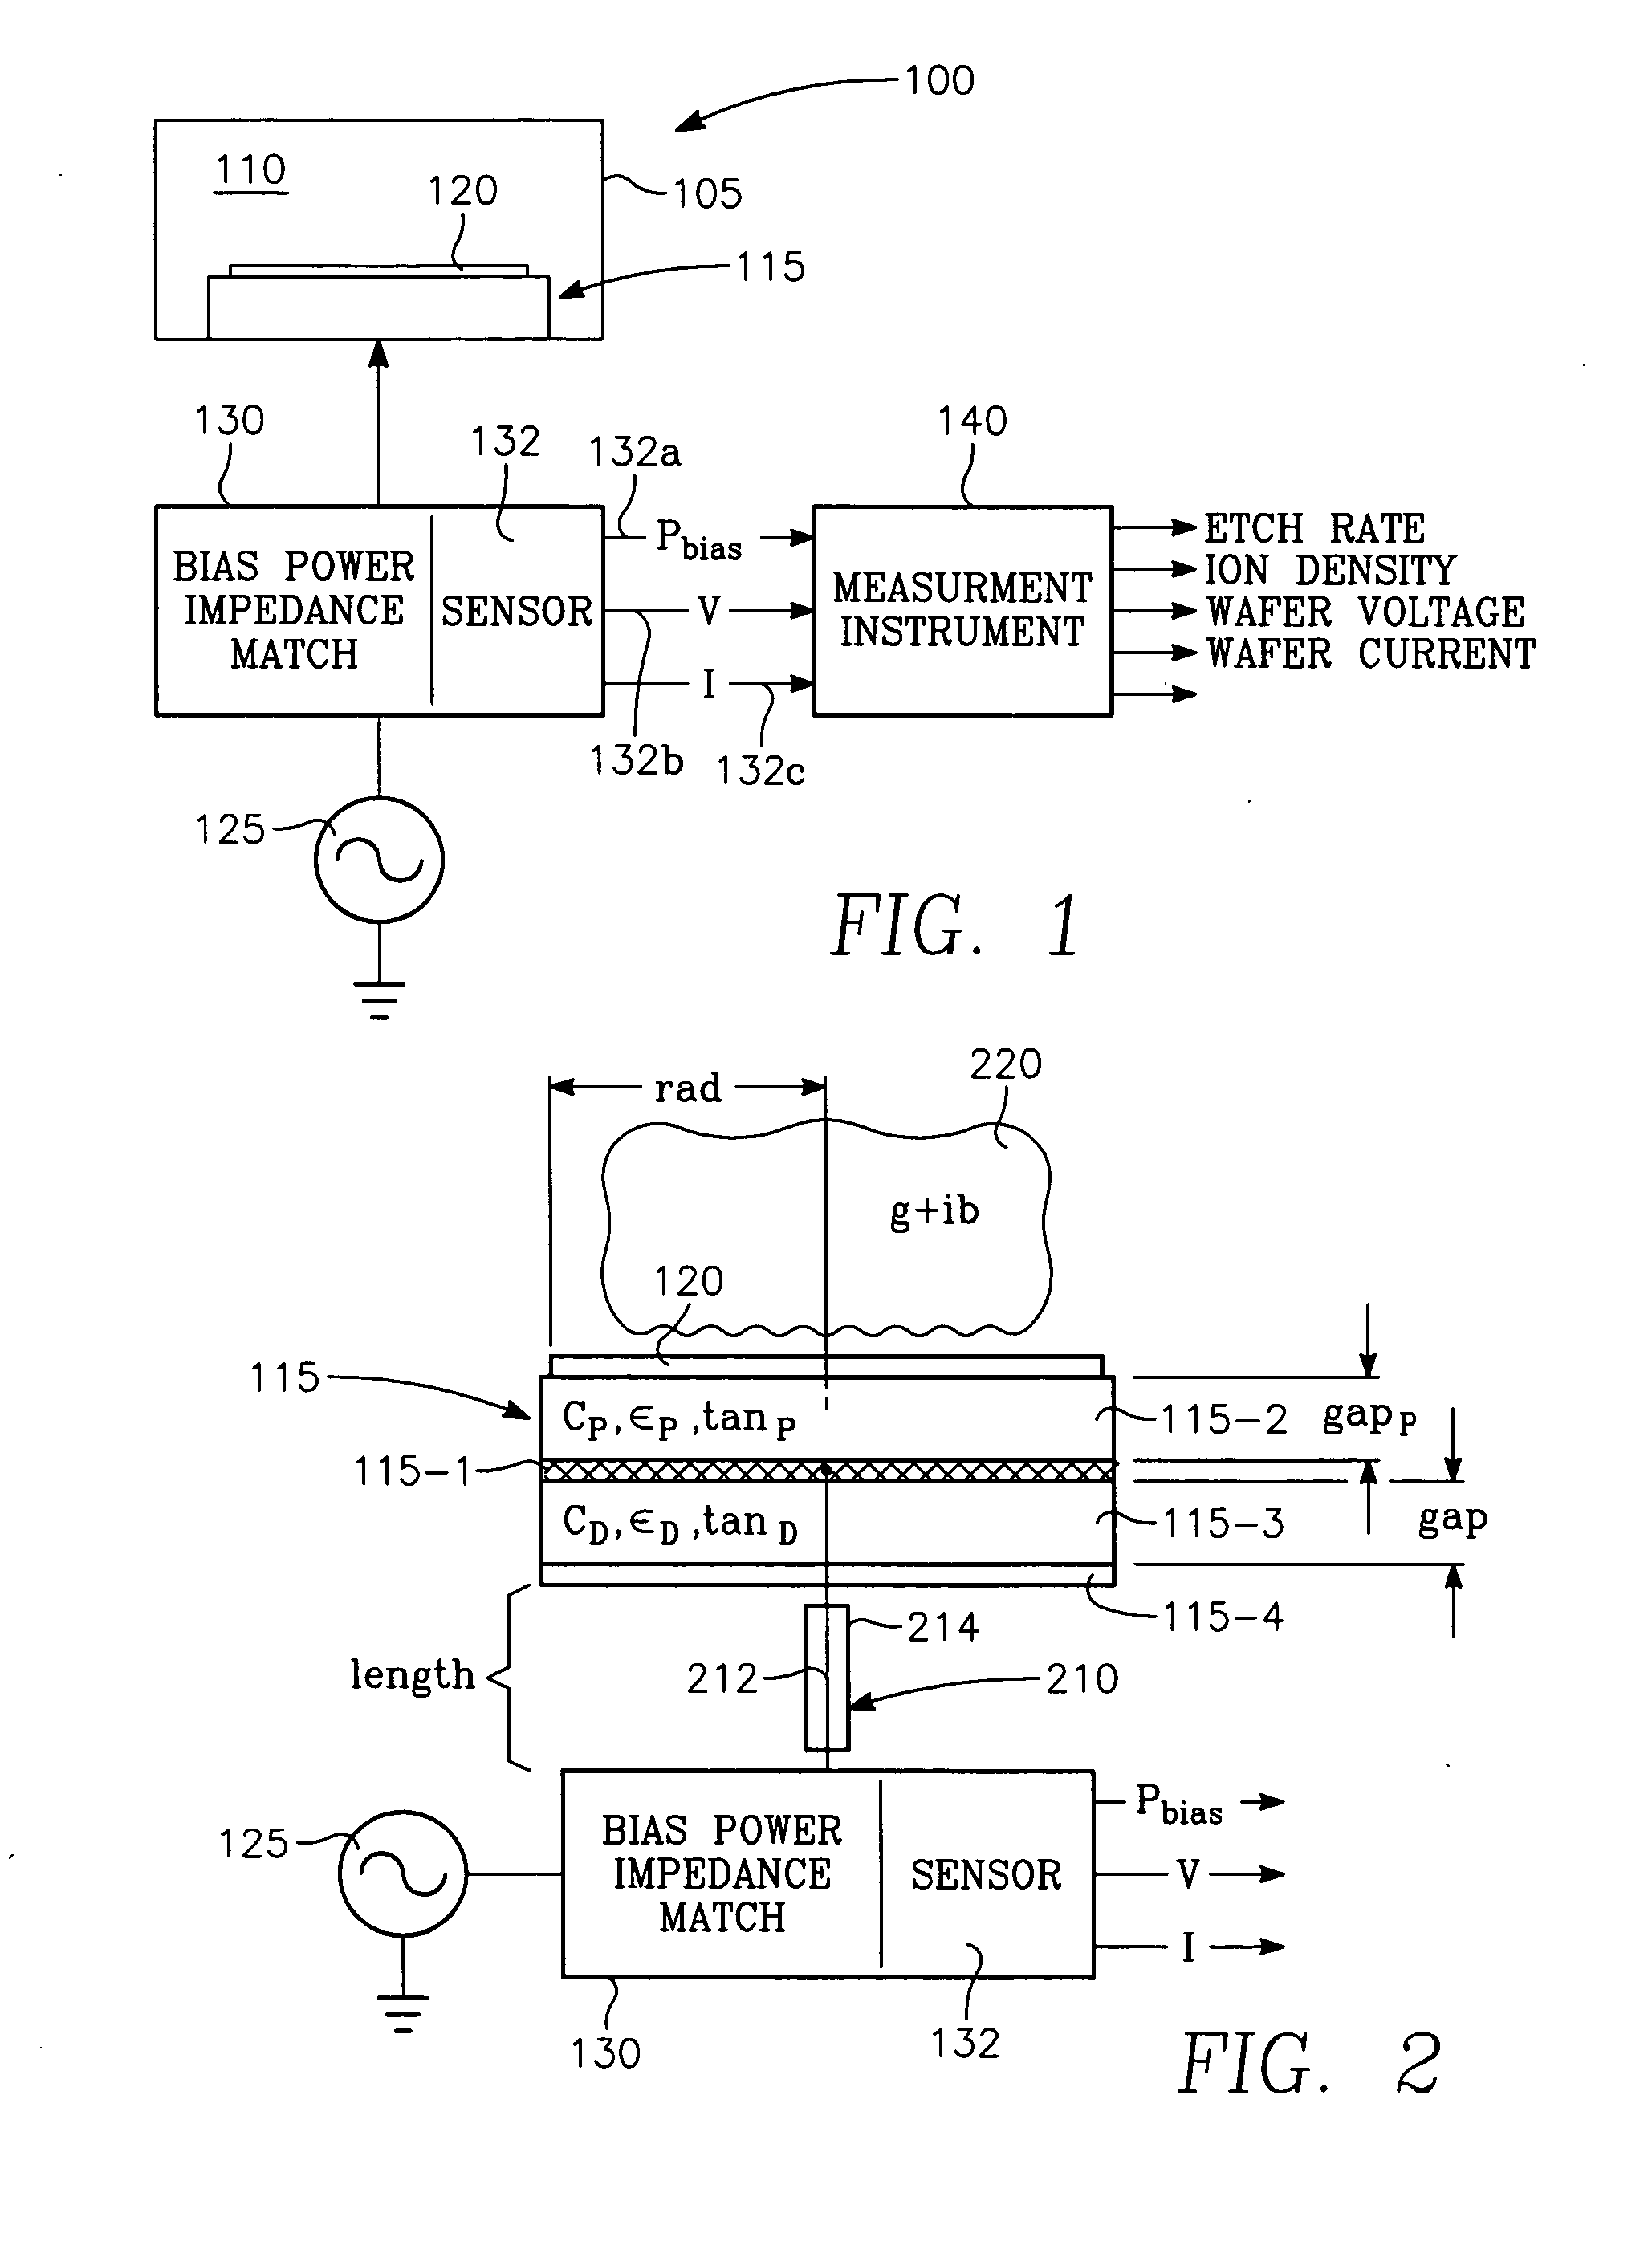 Method of controlling chamber parameters of a plasma reactor in accordance with desired values of plural plasma parameters, by translating desired values for the plural plasma parameters to control values for each of the chamber parameters